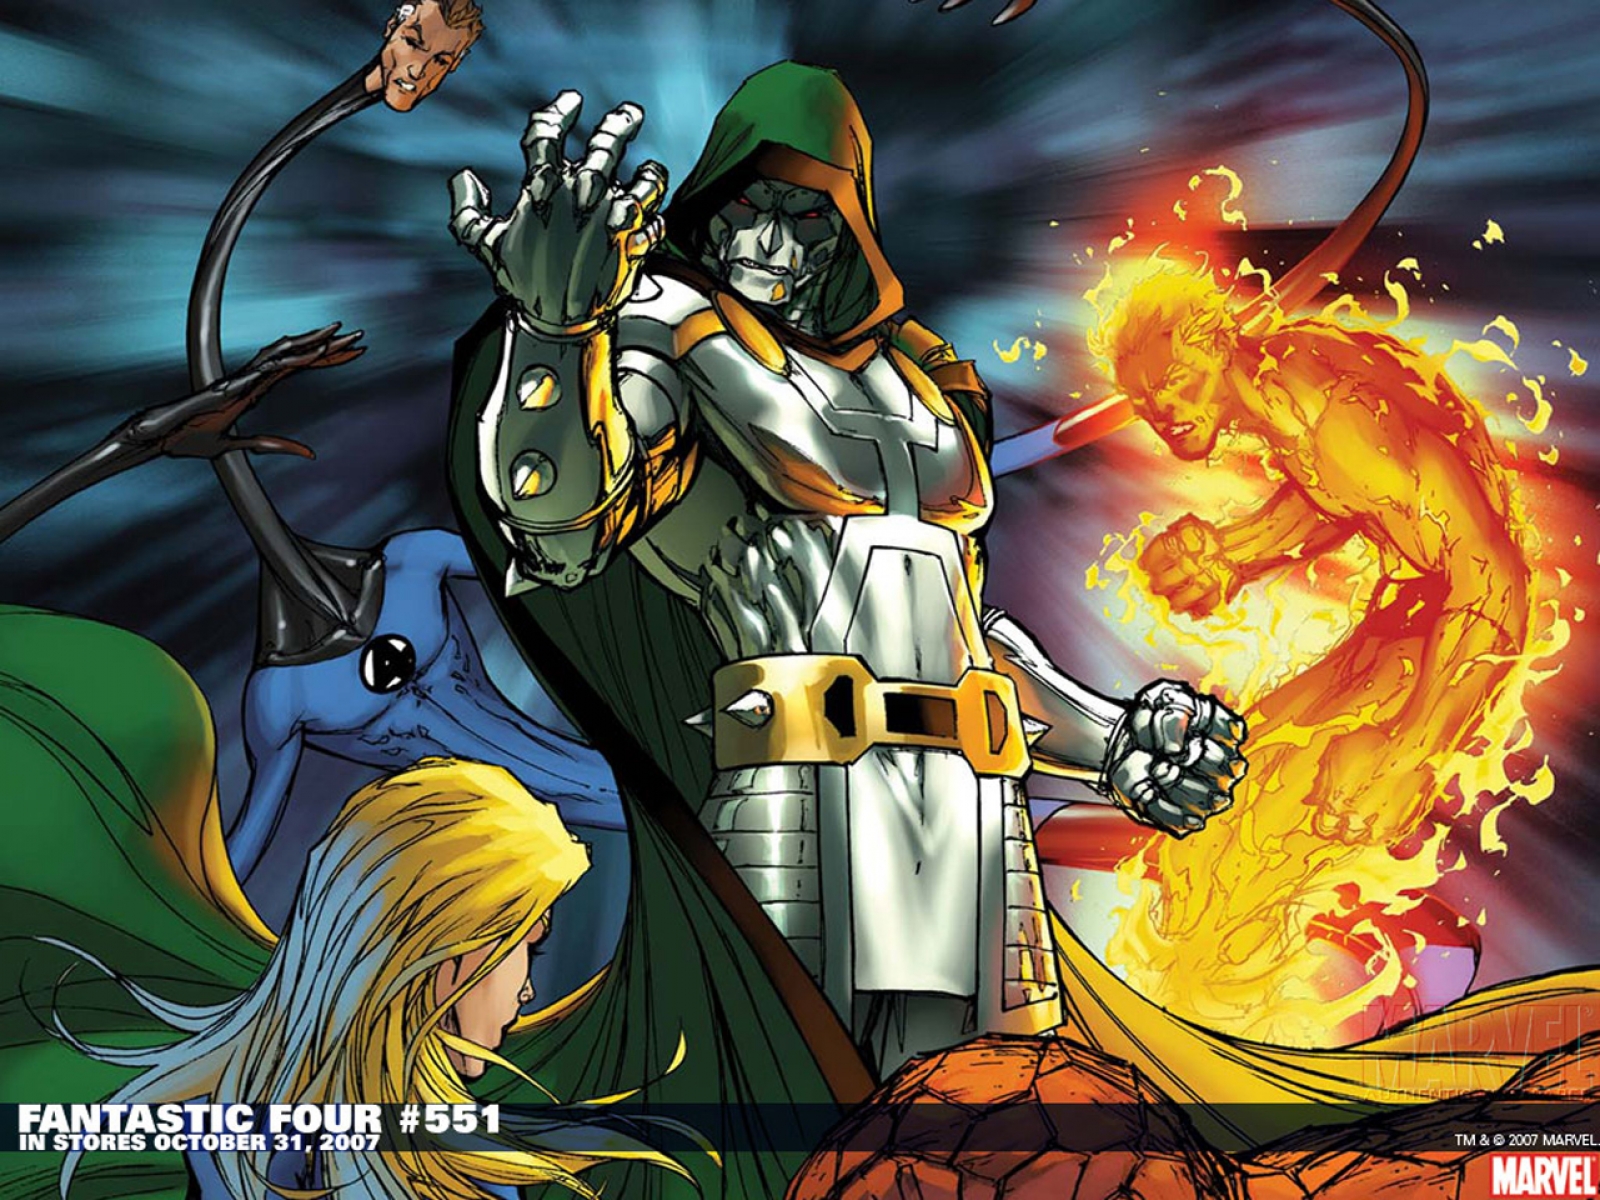 Marvel Comics characters including Thing, Human Torch, Mister Fantastic, Invisible Woman, and Doctor Doom.